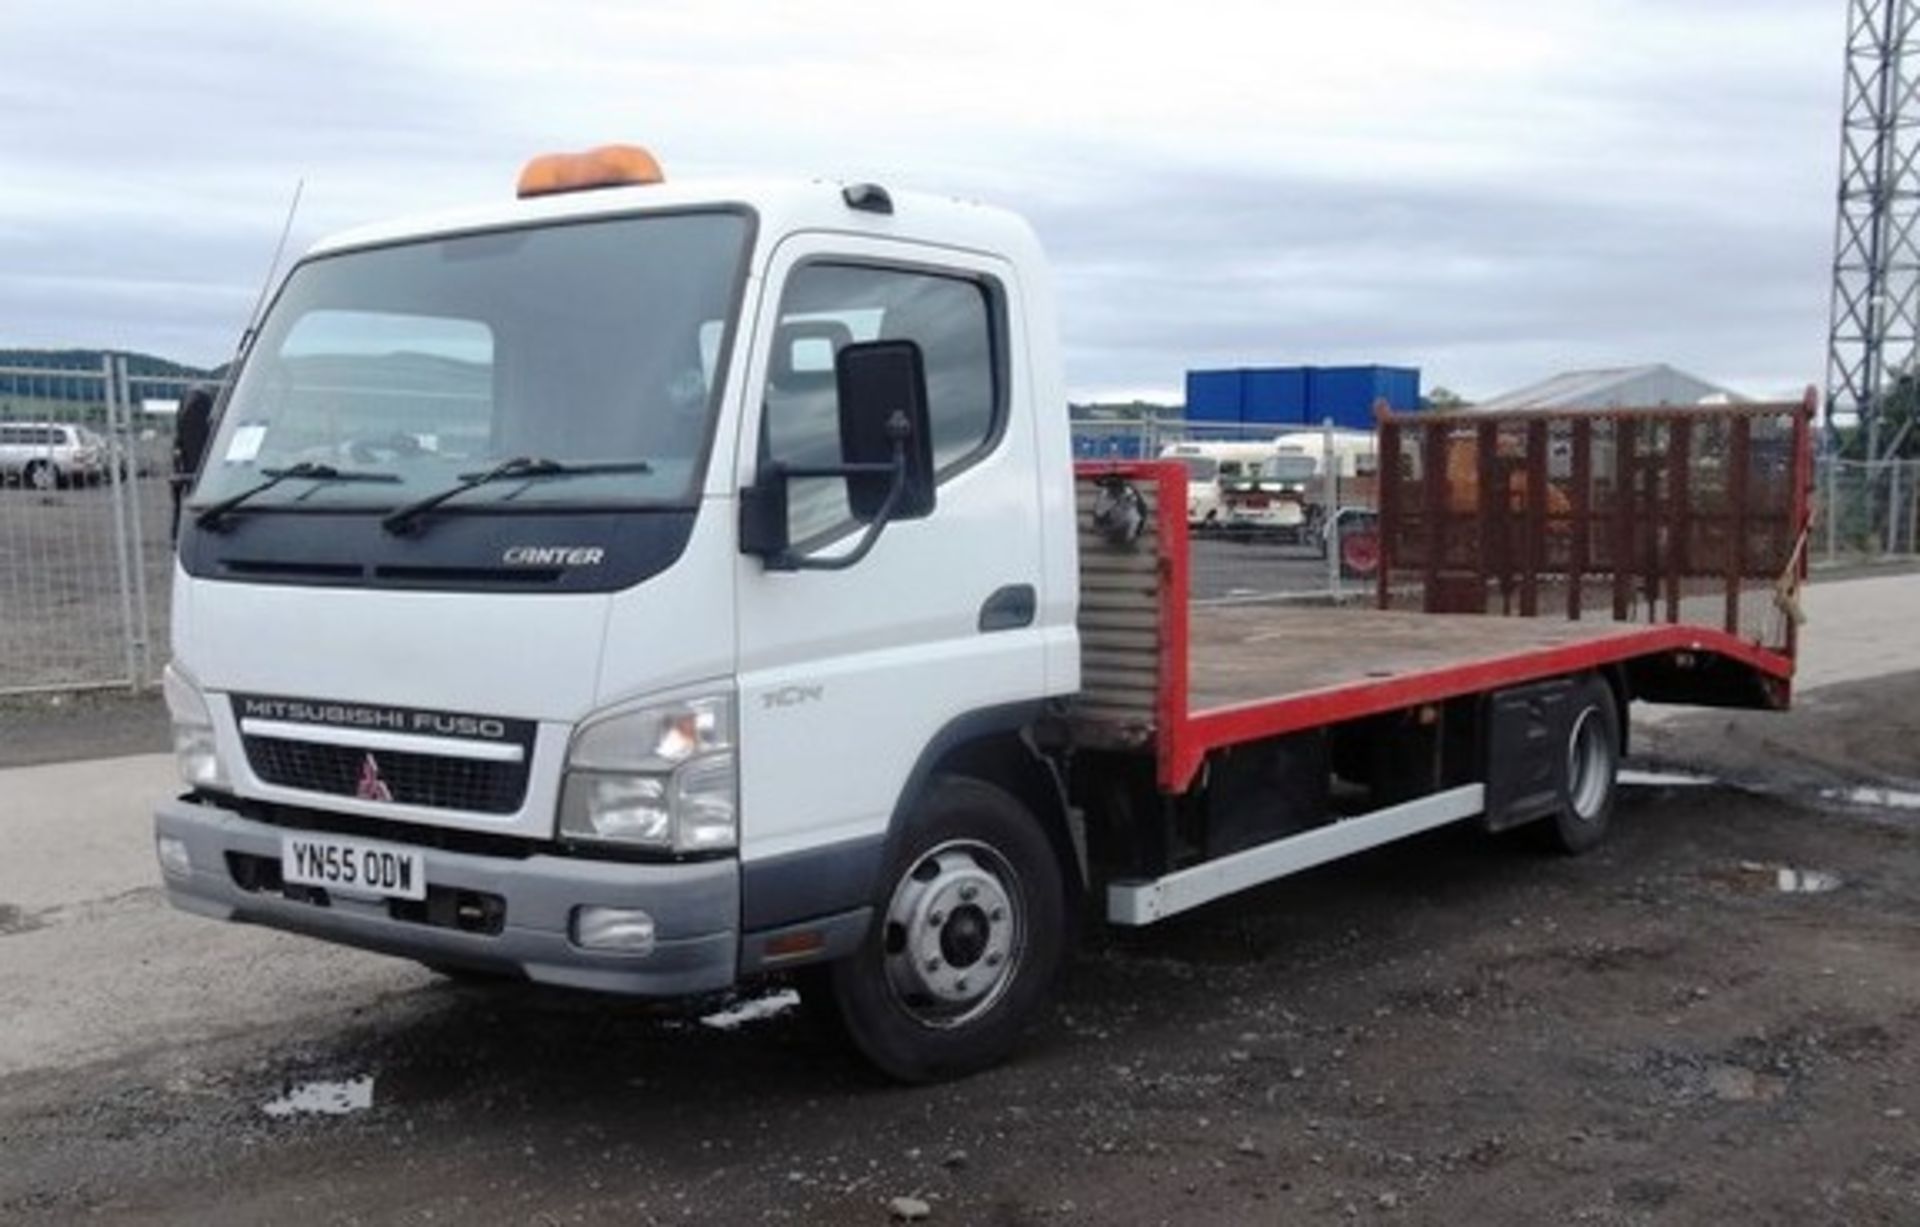 MITSUBISHI CANTER 75 7C14 - 3908cc
Body: 2 Dr Truck
Color: White
First Reg: 01/09/2005
Doors: 2
MOT: